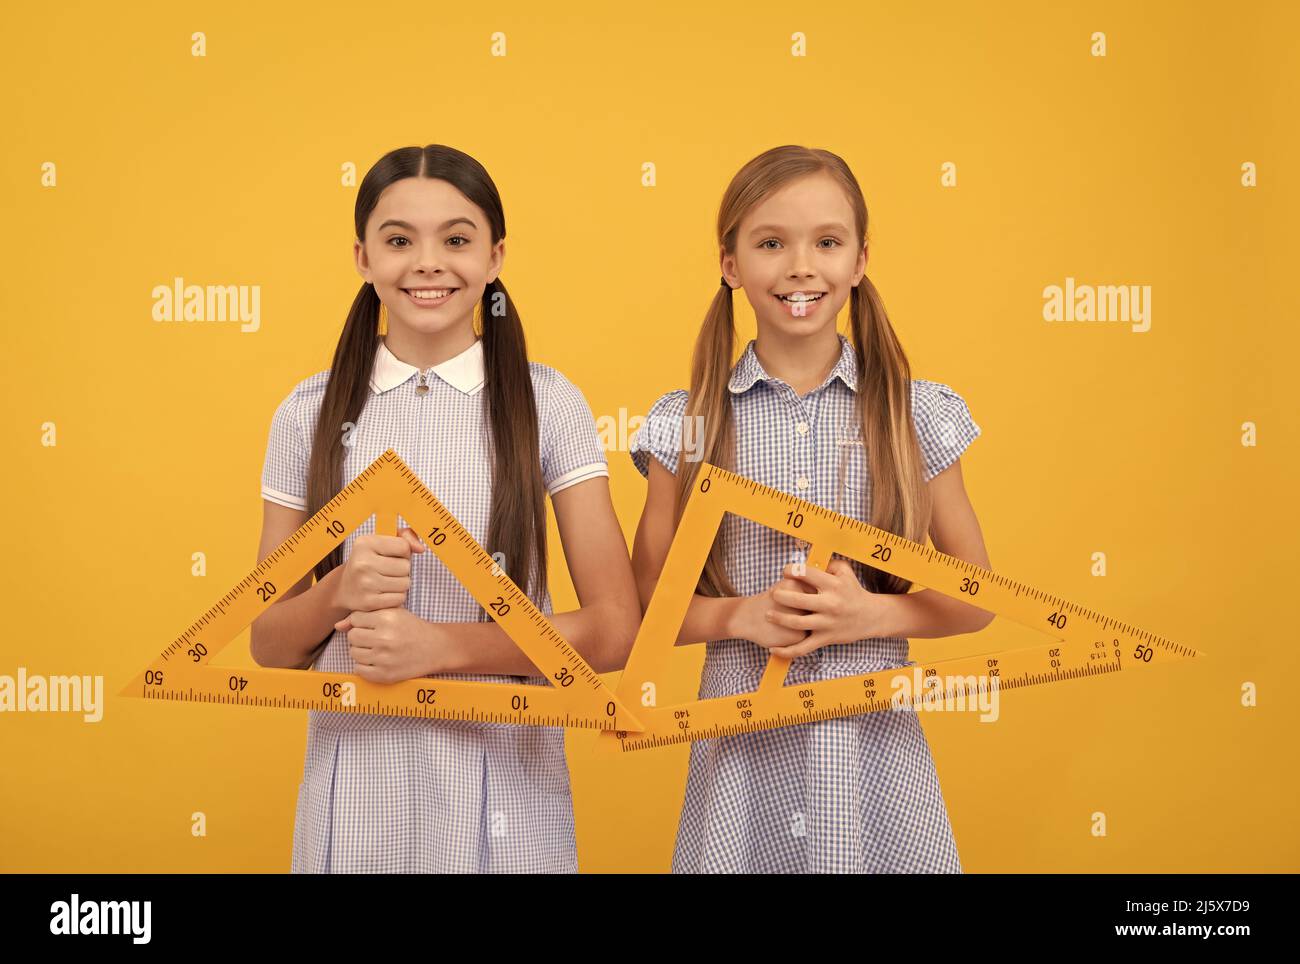 Geometry is for triangles. Happy kids hold triangular rulers. Geometry lesson. School education Stock Photo